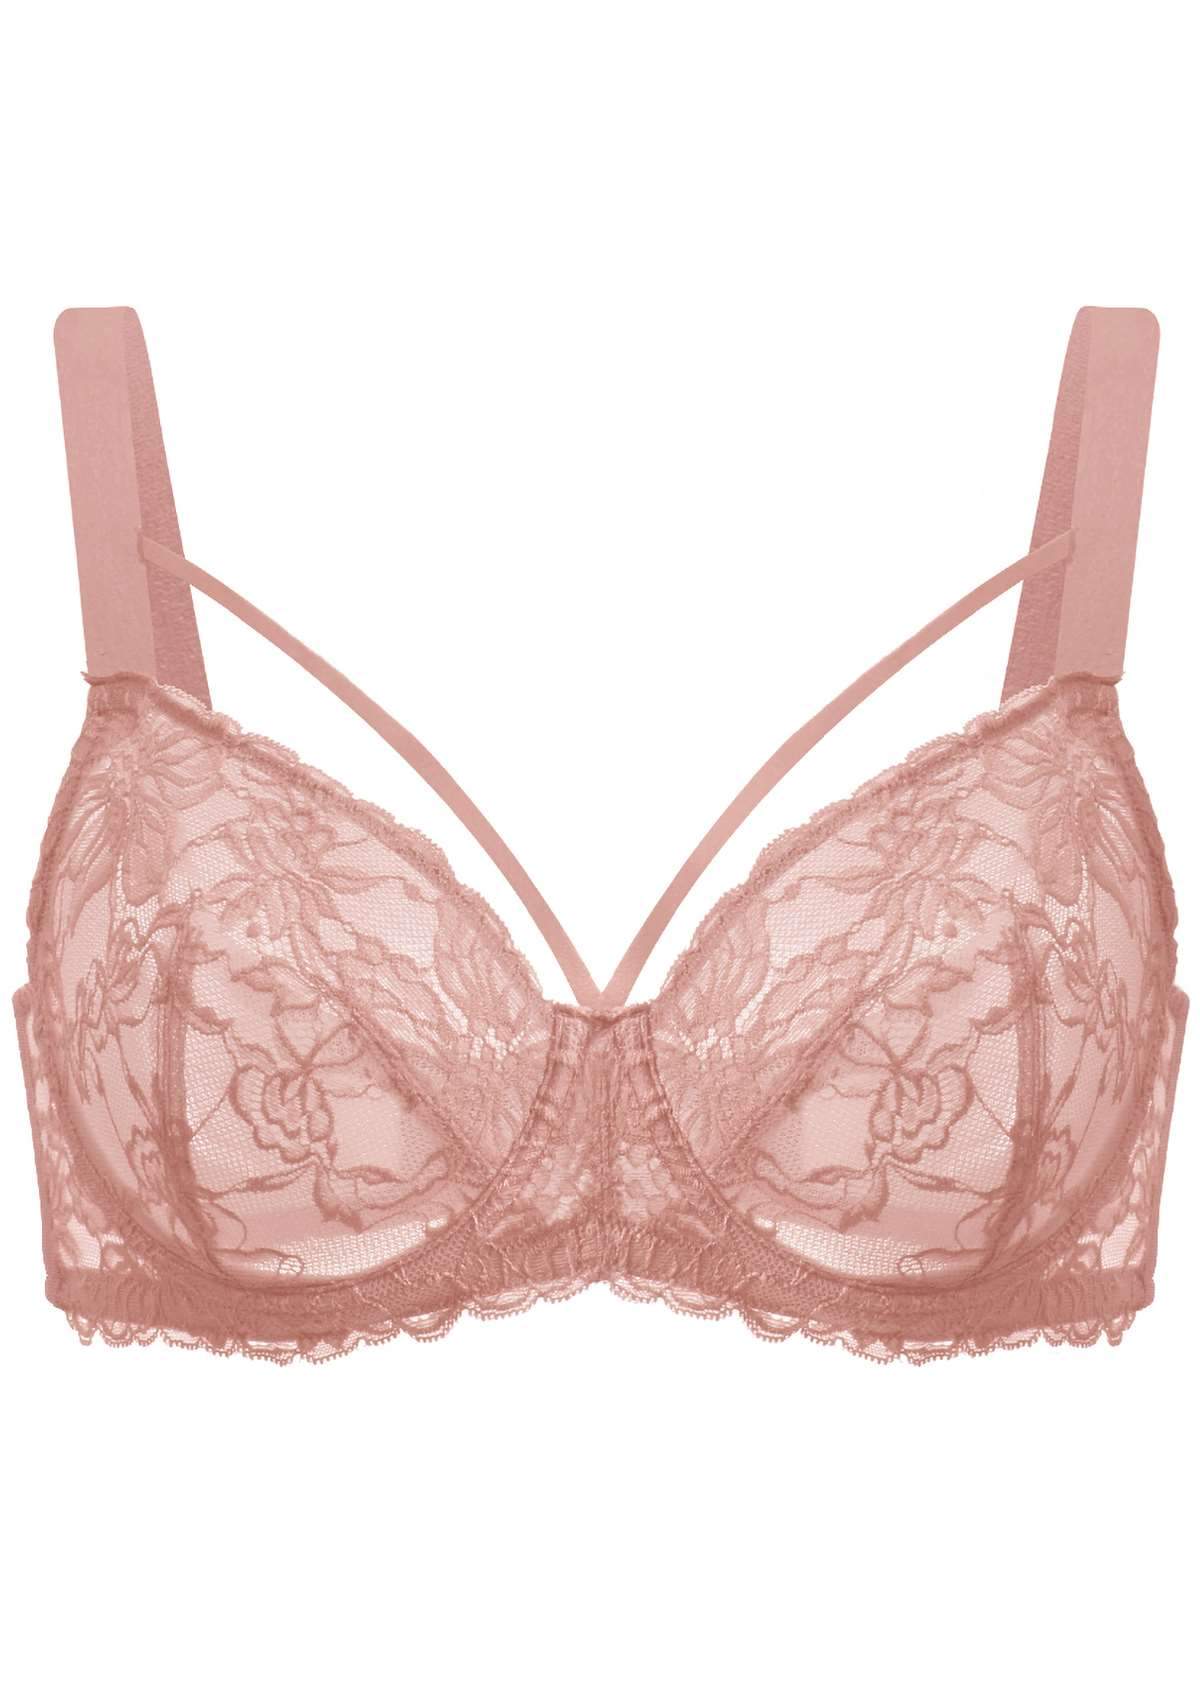 HSIA Pretty In Petals Lace Bra And Panty Sets: Bra For Big Boobs - Light Coral / 42 / C